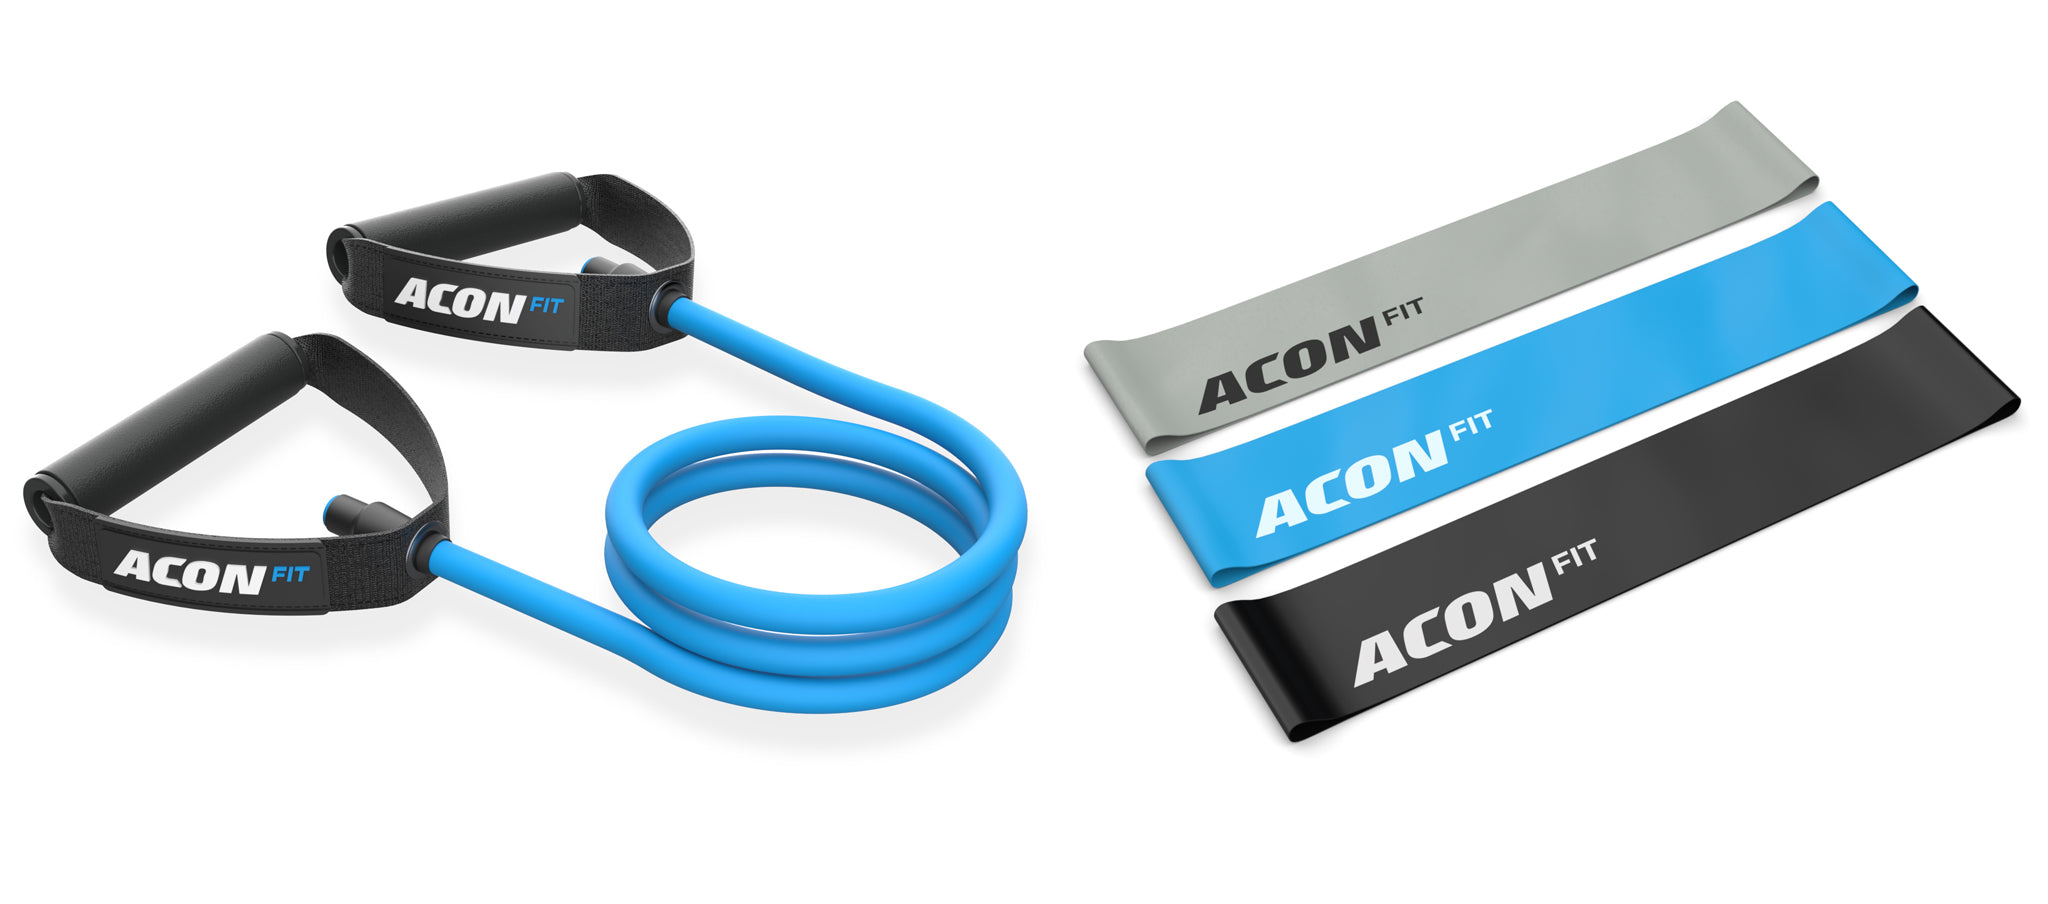 Two types of resistance bands by ACON. The resistance band on the left is blue and it has black handles. The three basic resistance bands on the right are grey, blue and black 